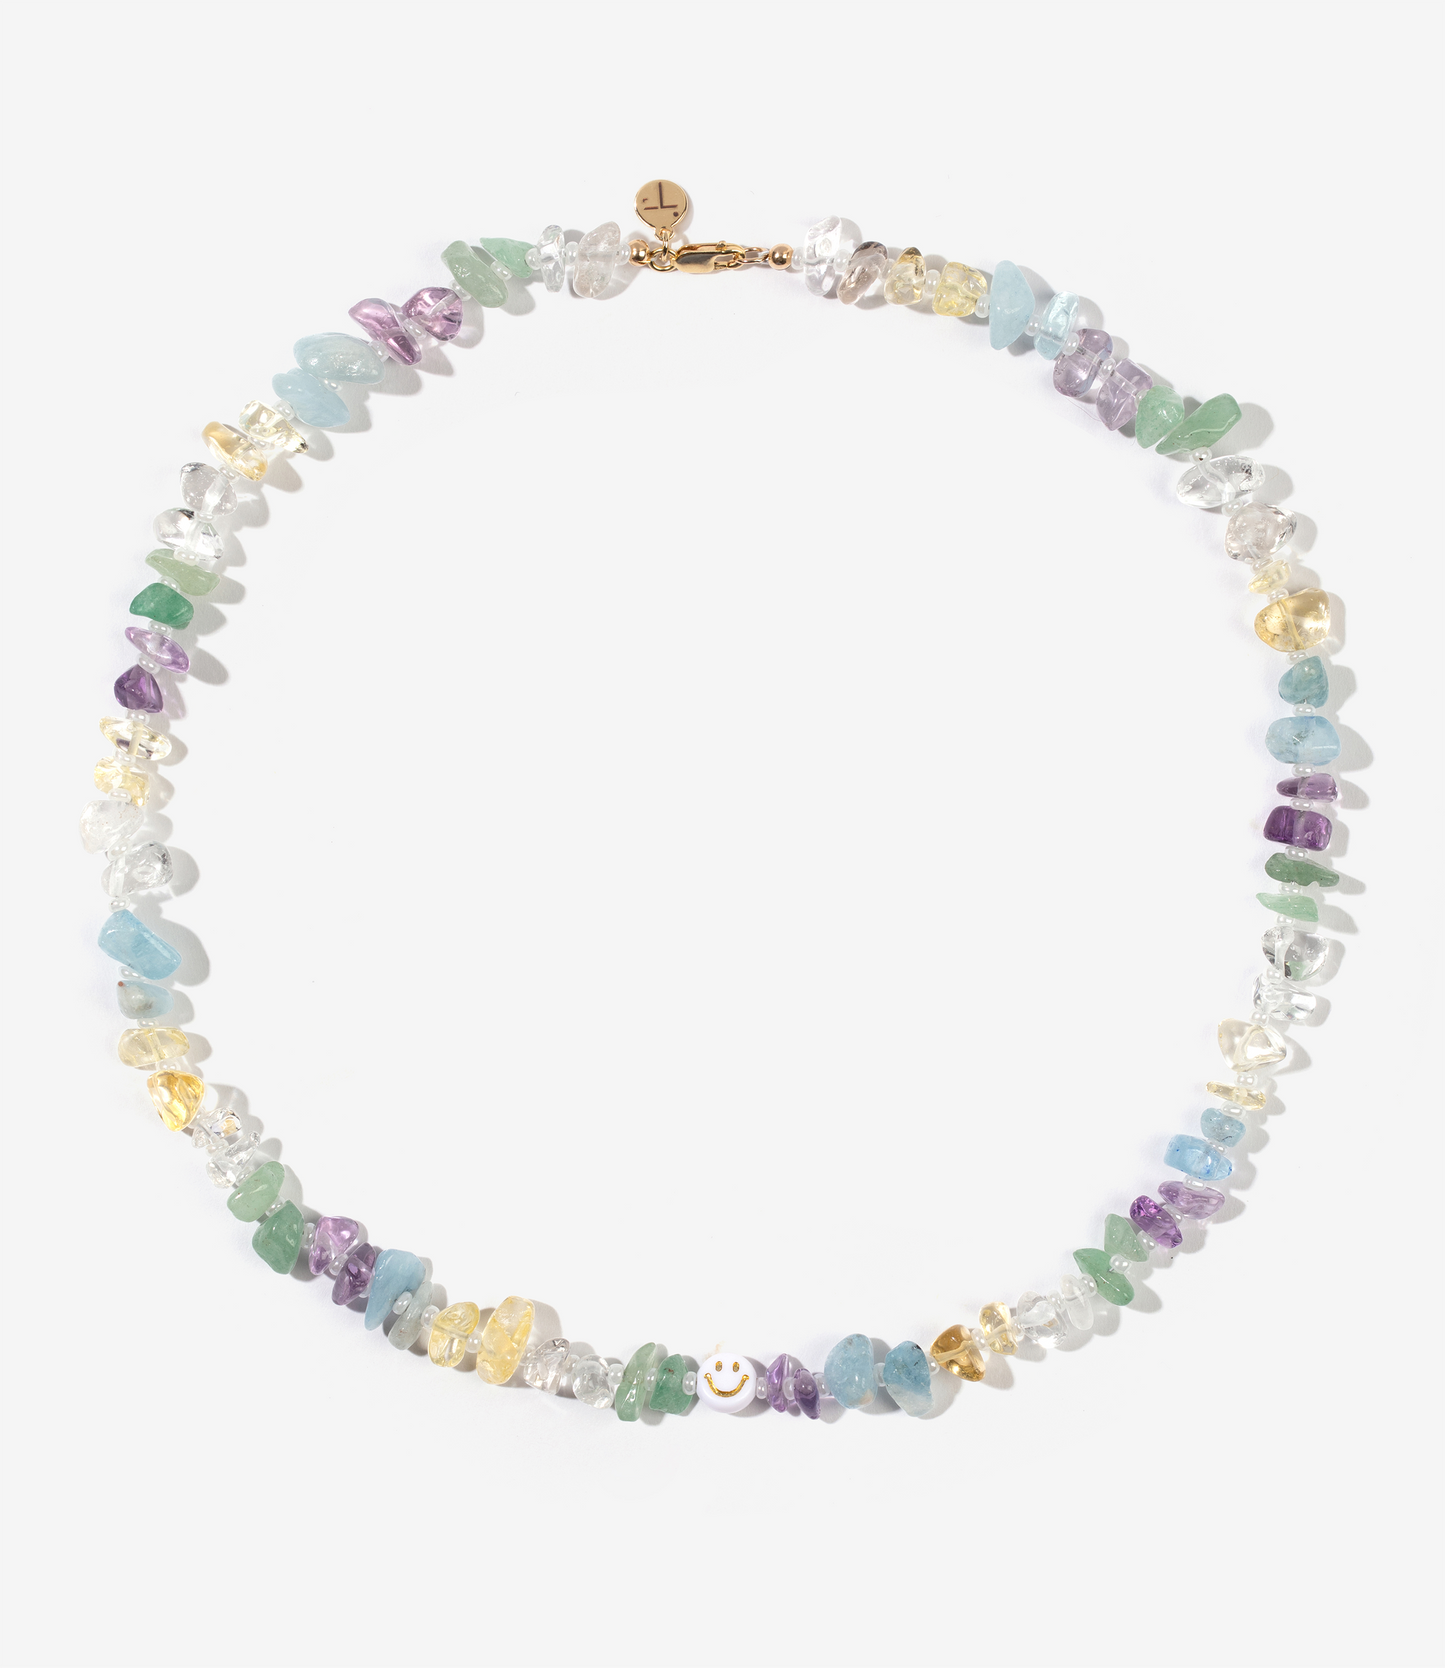 MULTI BRIGHT HAPPY FACE Crystal Healing Necklace